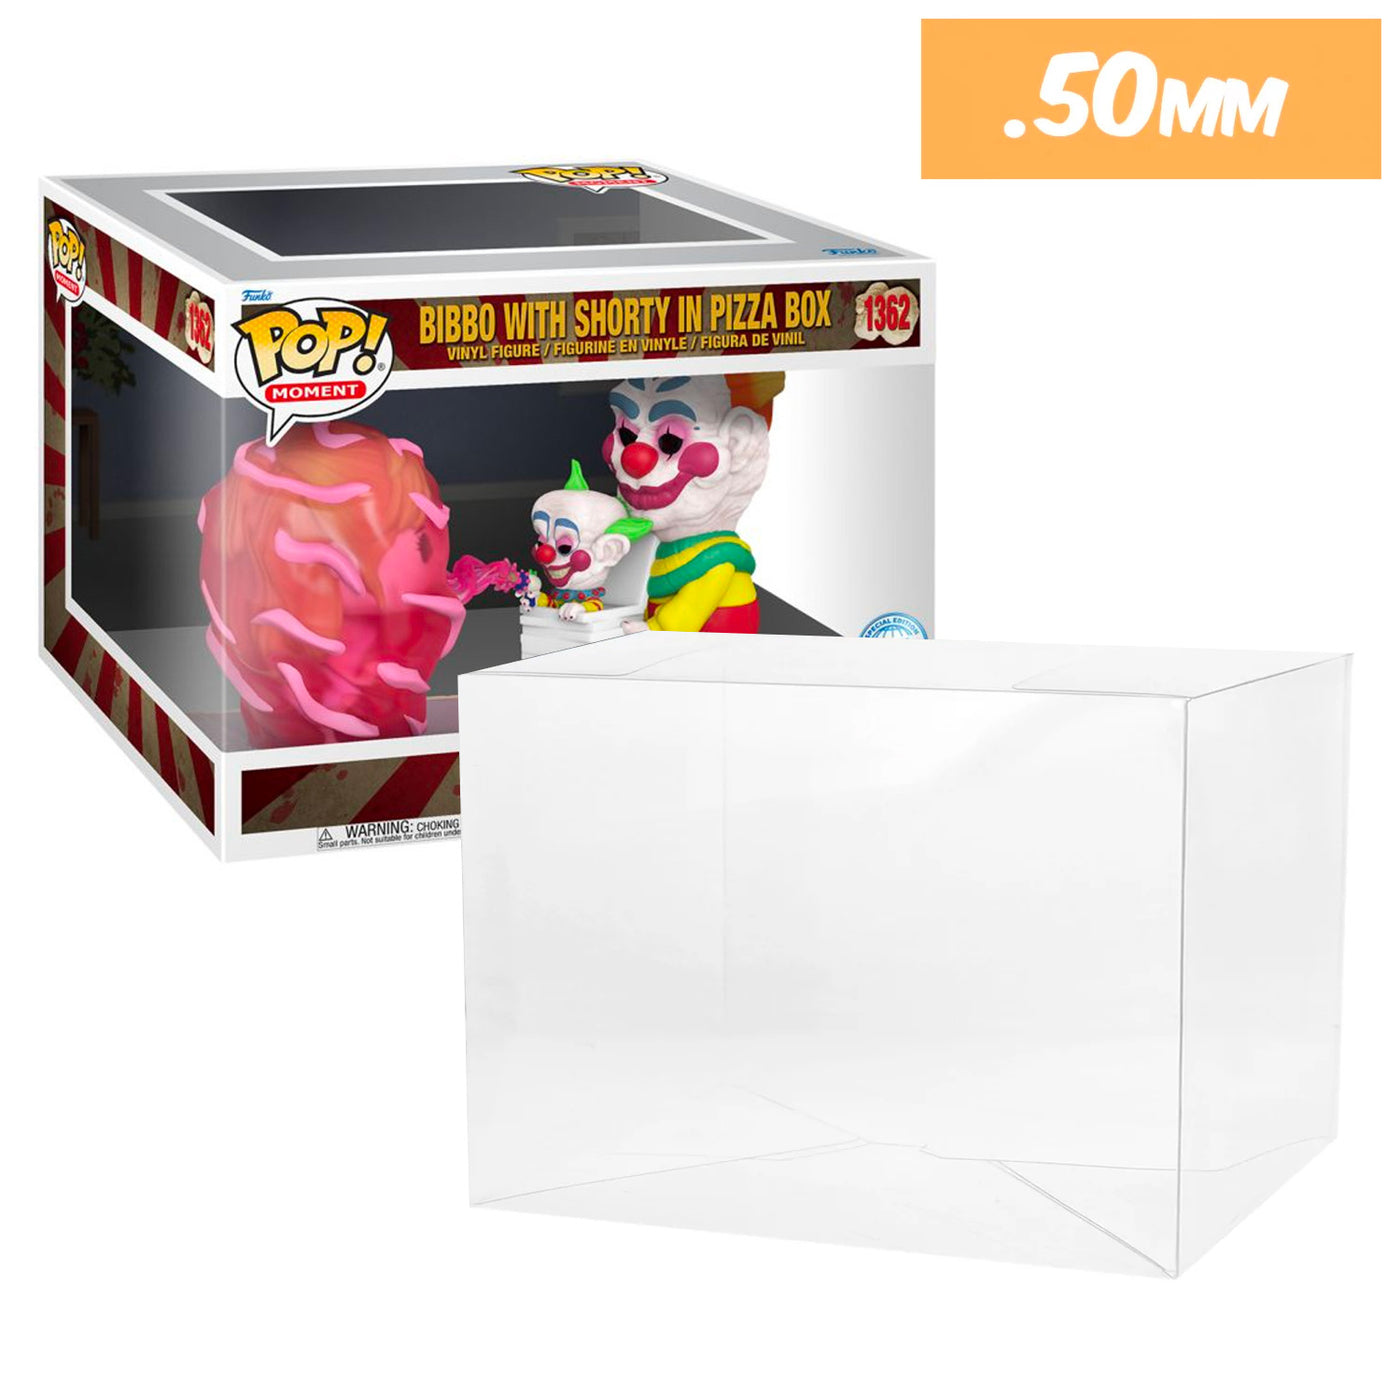 1362 killer klowns bibbo with shorty in pizza box pop moment best funko pop protectors thick strong uv scratch flat top stack vinyl display geek plastic shield vaulted eco armor fits collect protect display case kollector